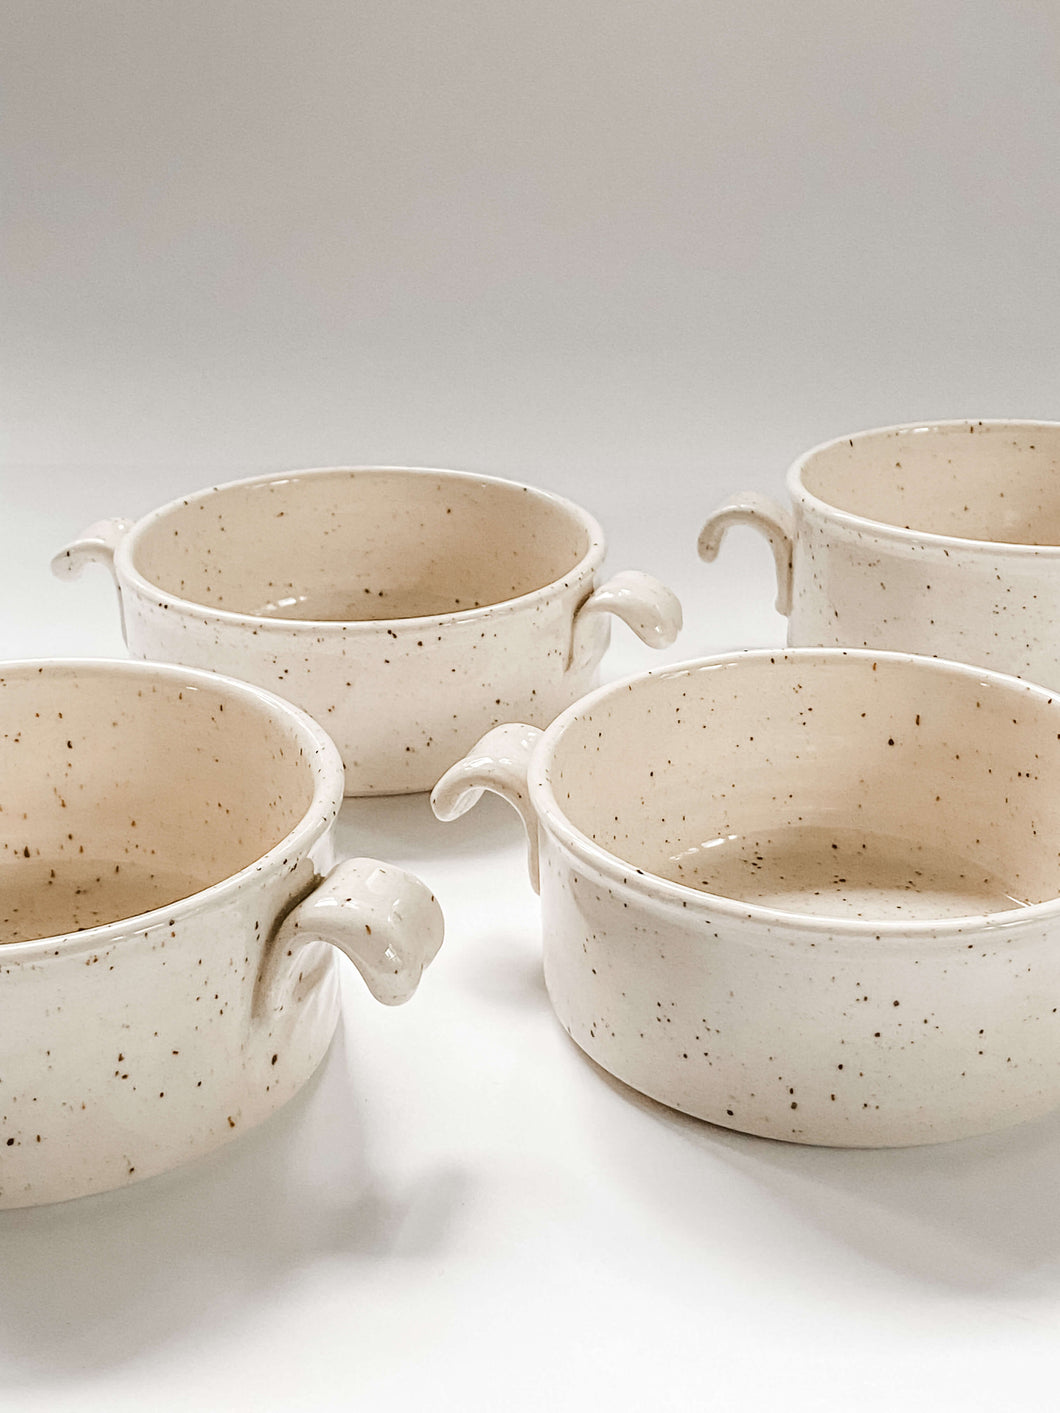 4 Wheel thrown cylindrical soup bowls with two hooked handles in a cream and brown speckled clay